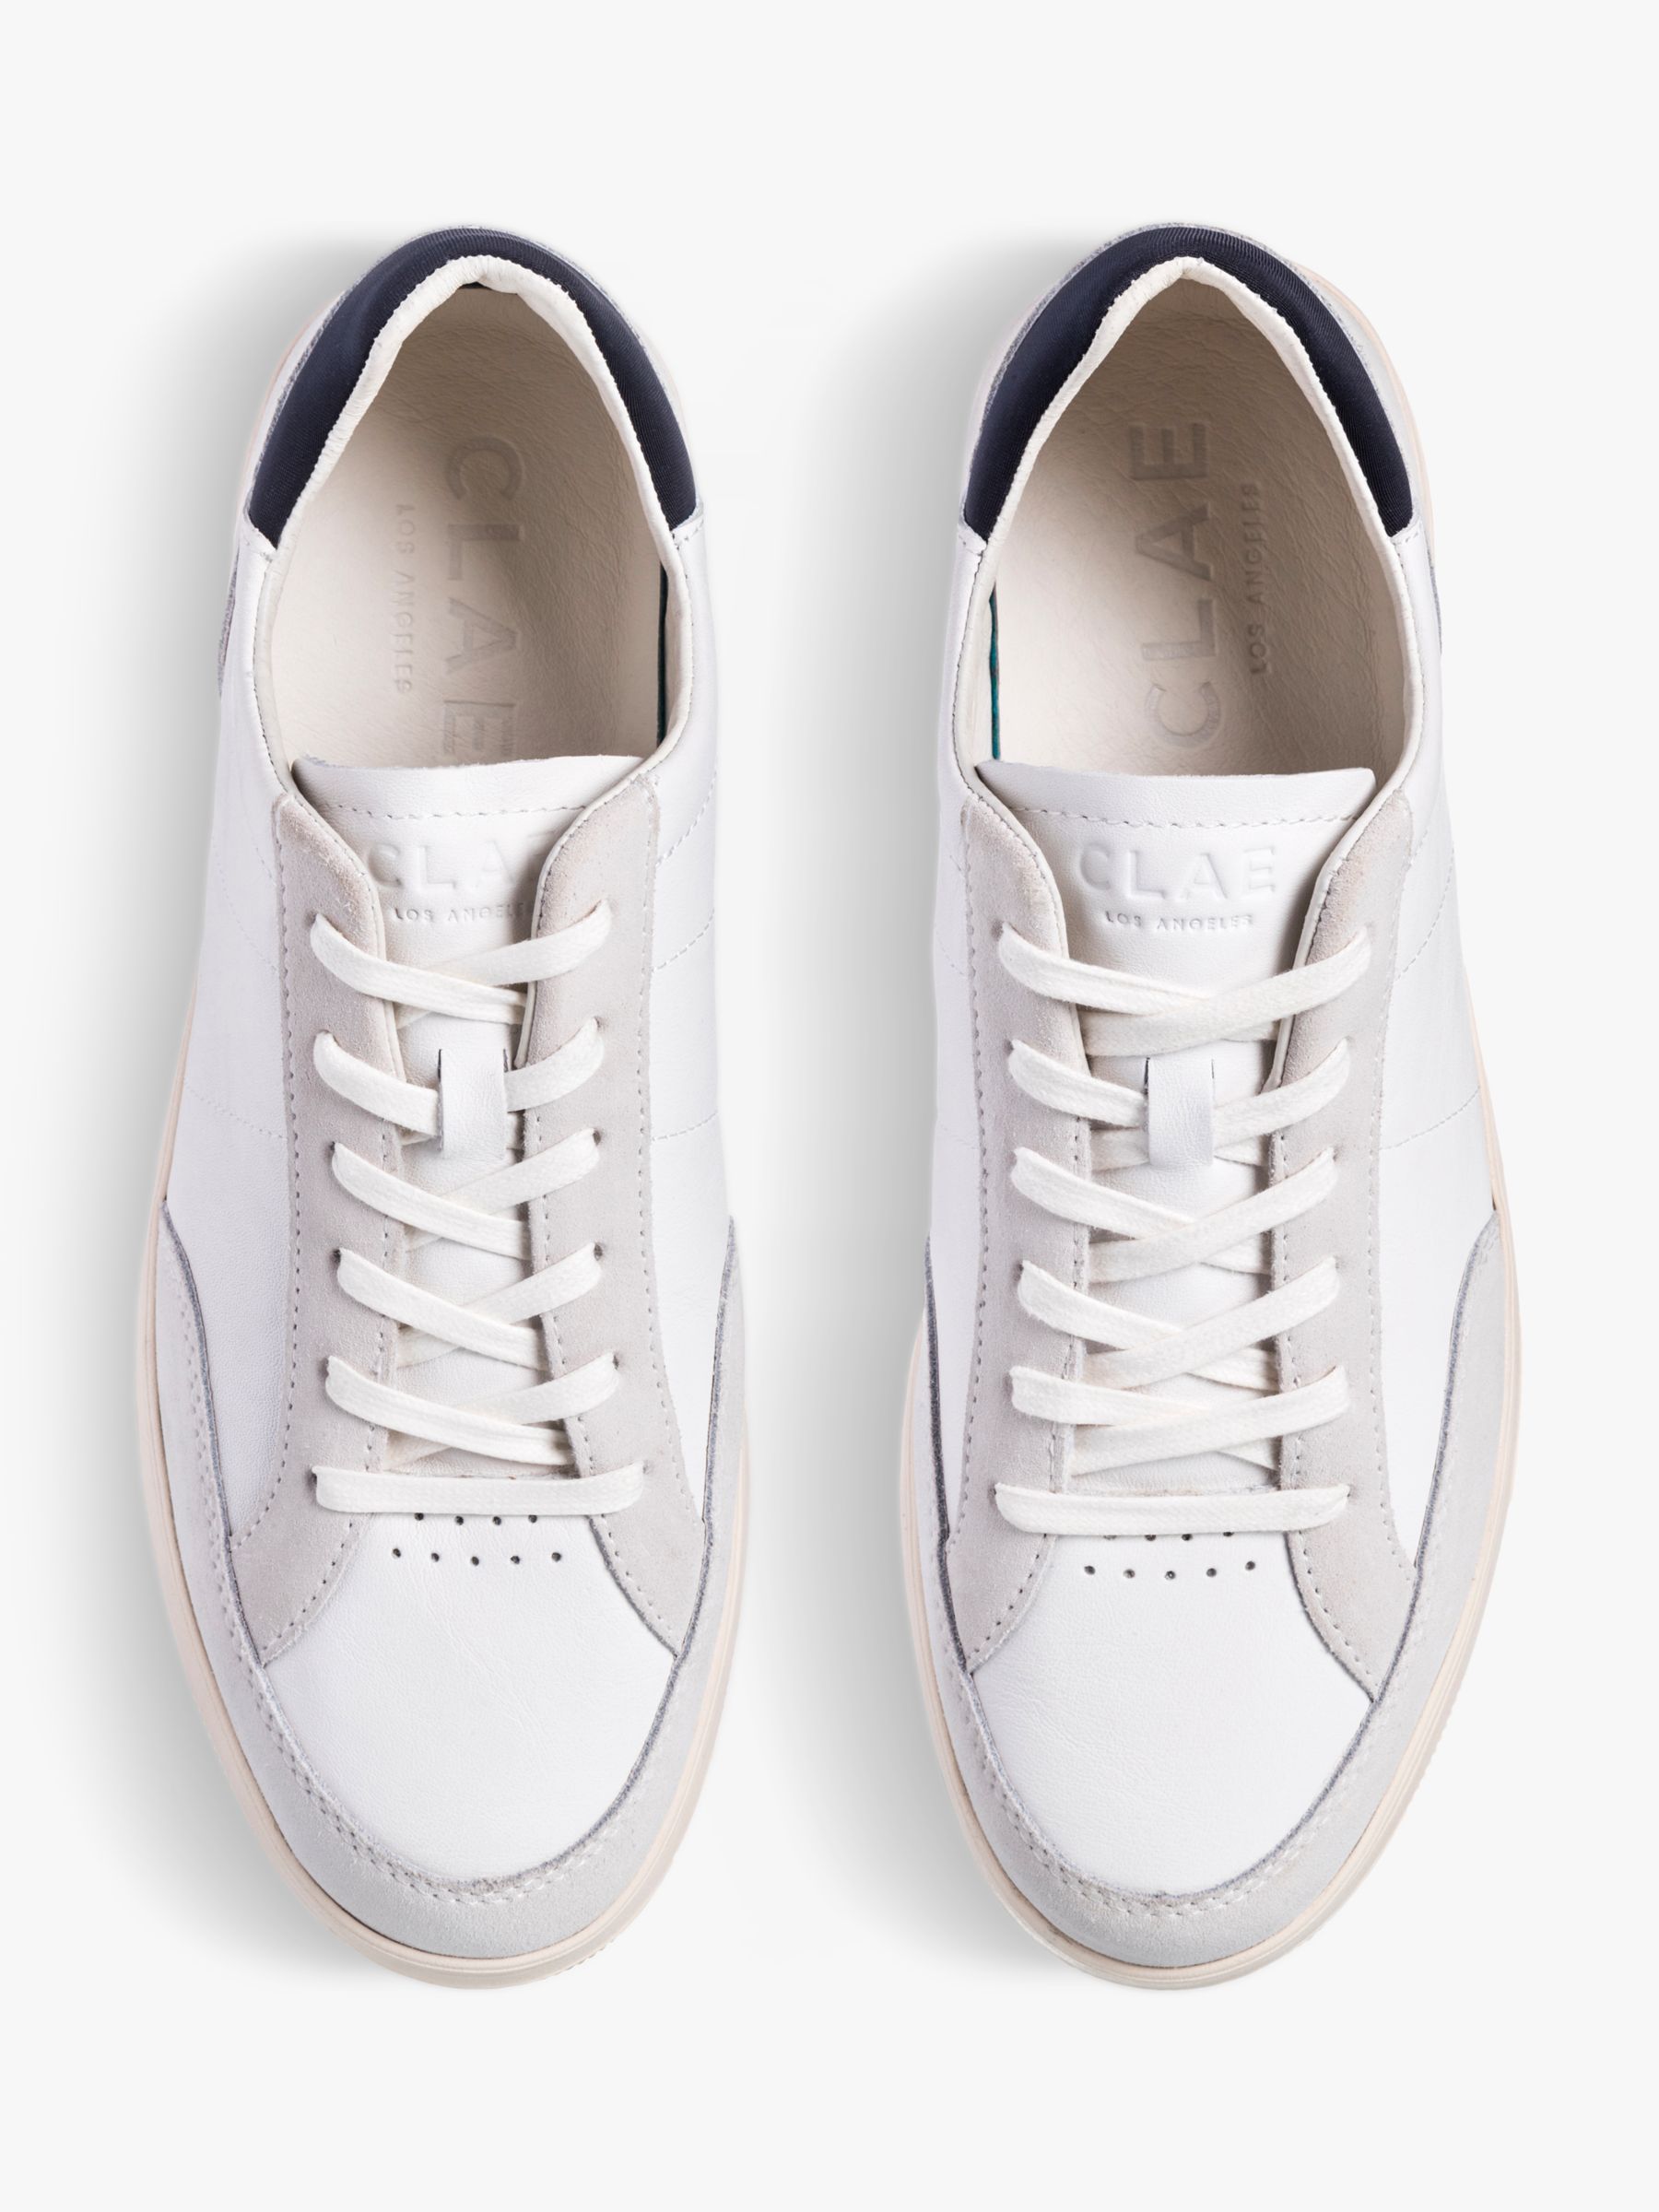 CLAE Monroe Leather Lace Up Trainers, White/Navy, 8